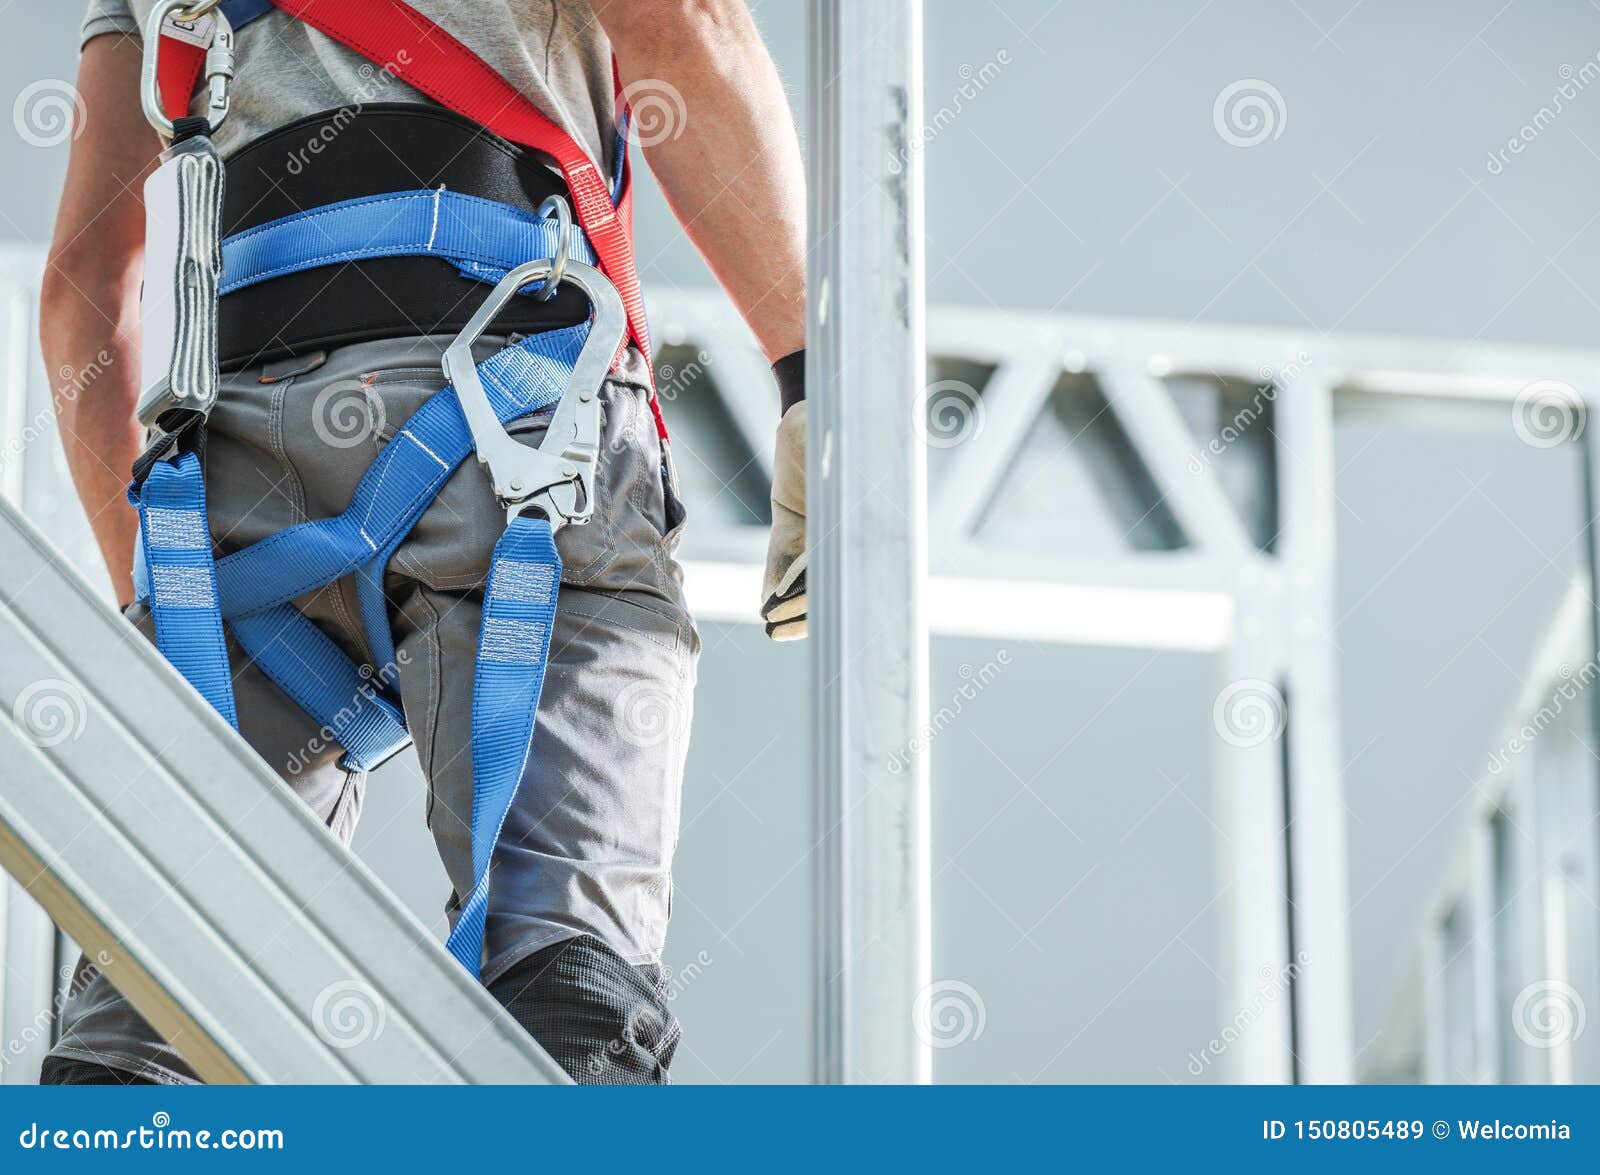 construction safety harness